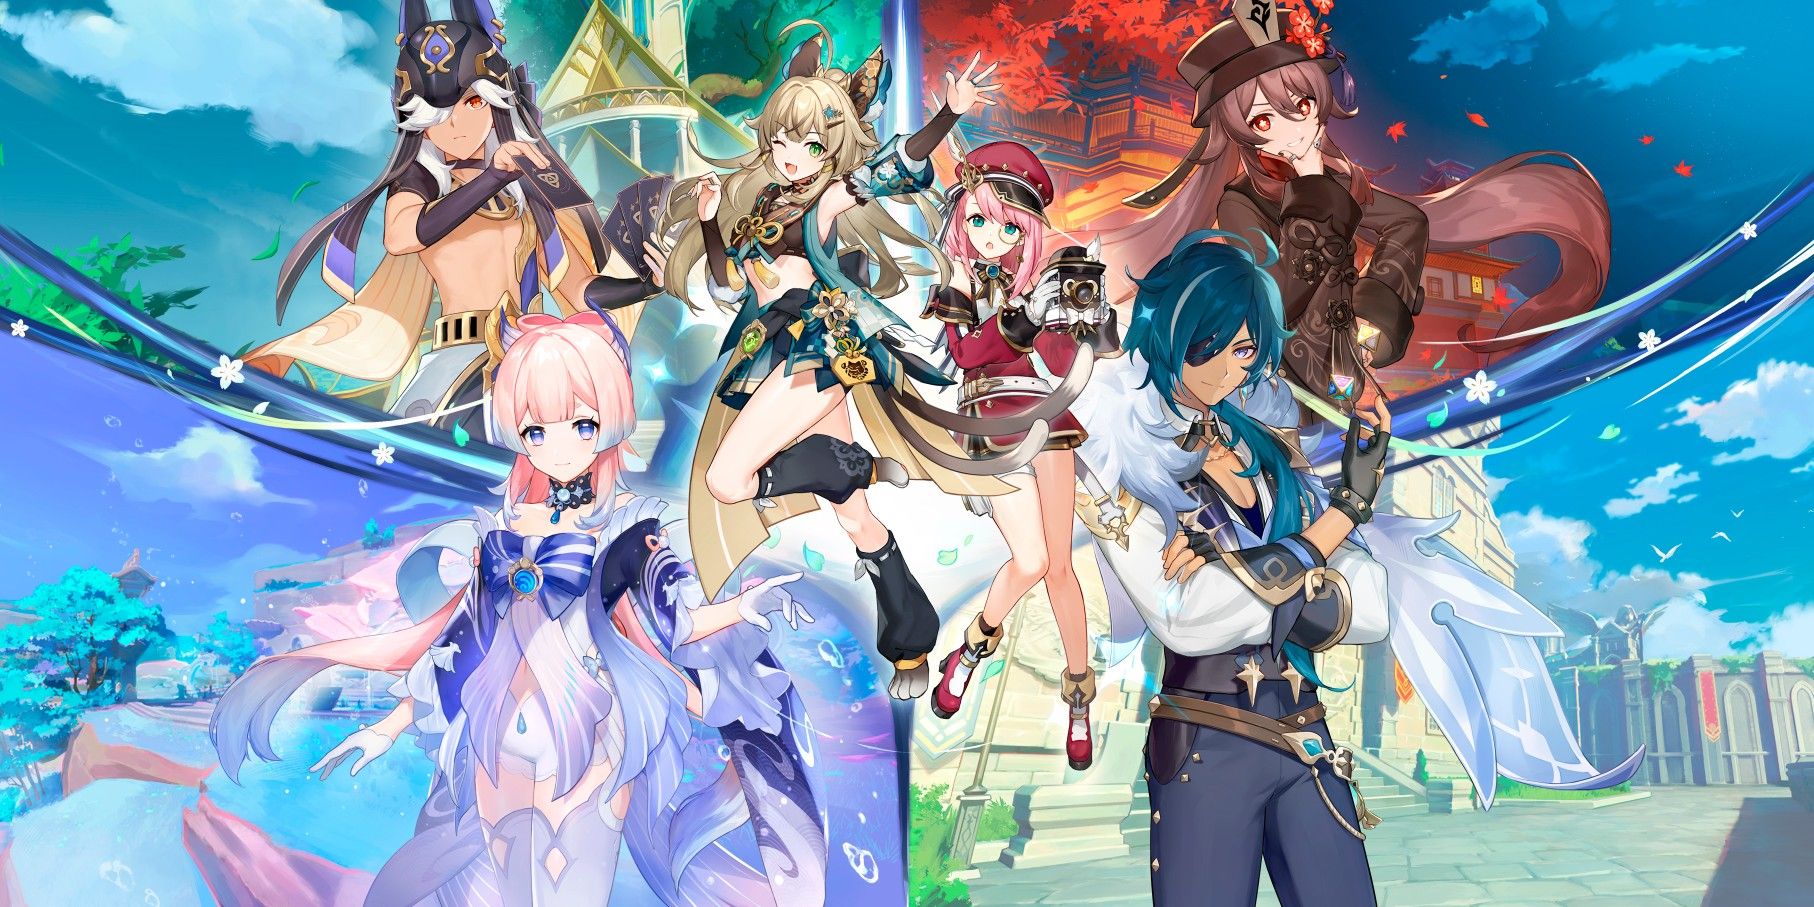 Genshin Impact 3.7's key art, featuring Kokomi to the left and Kaeya to the right. Between them are Kirara and Charlotte. Above Kokomi is Cyno and above Kaeya stands Hu Tao. In the background is a collage of all the four regions in Genshin Impact so far.